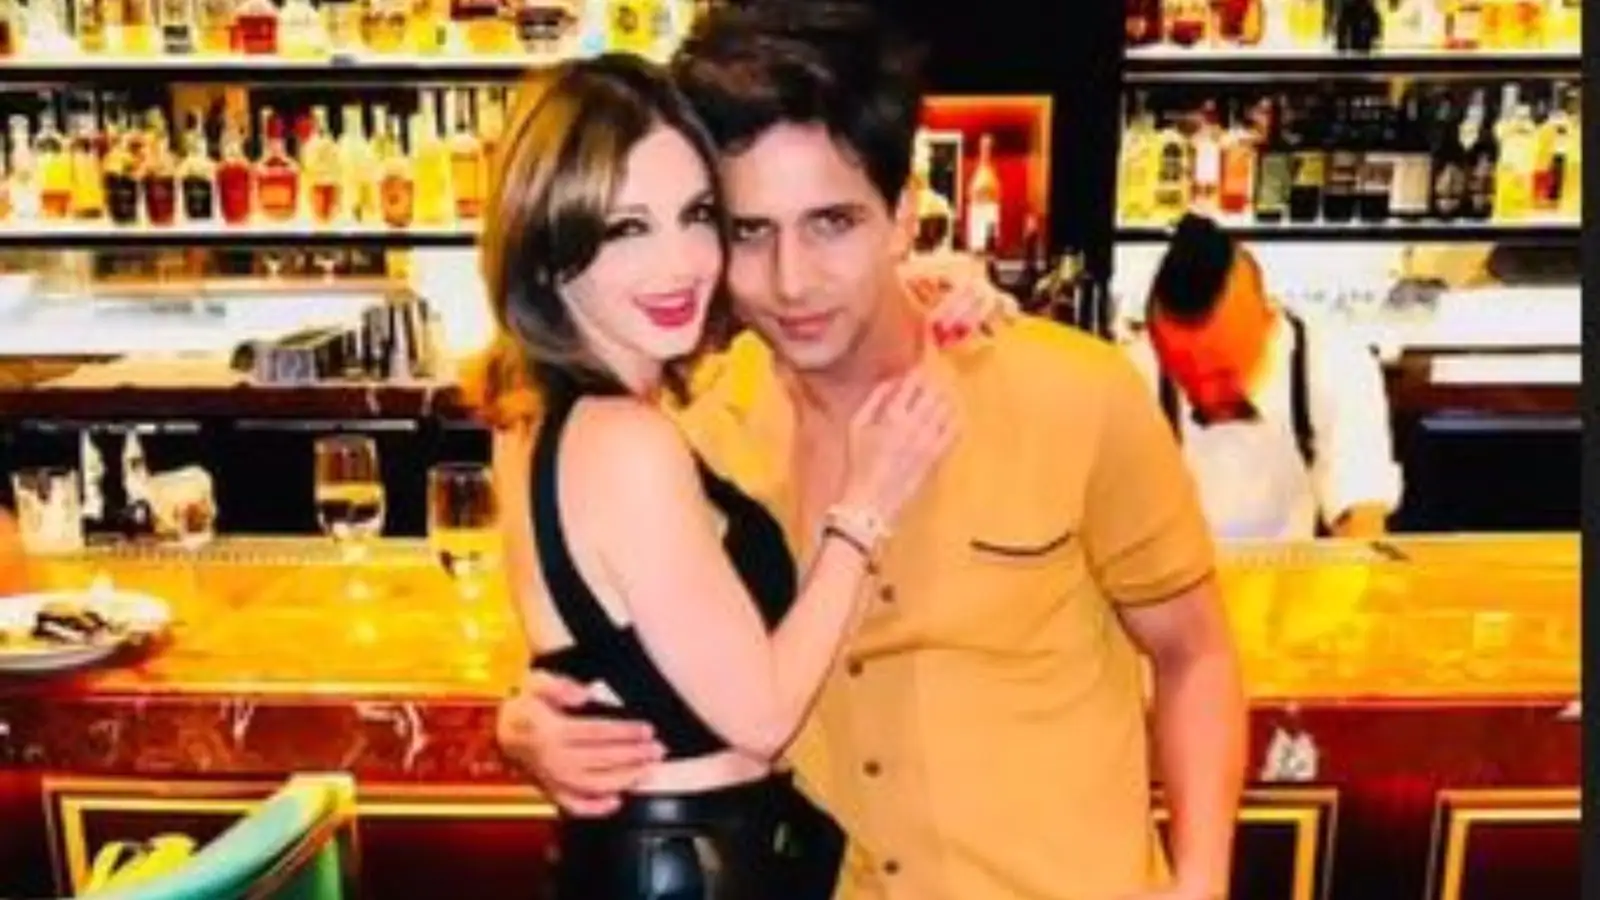 Sussanne Khan Gets Cosy With Rumoured Beau Arslan Goni in Latest Instagram Post, Take a Look